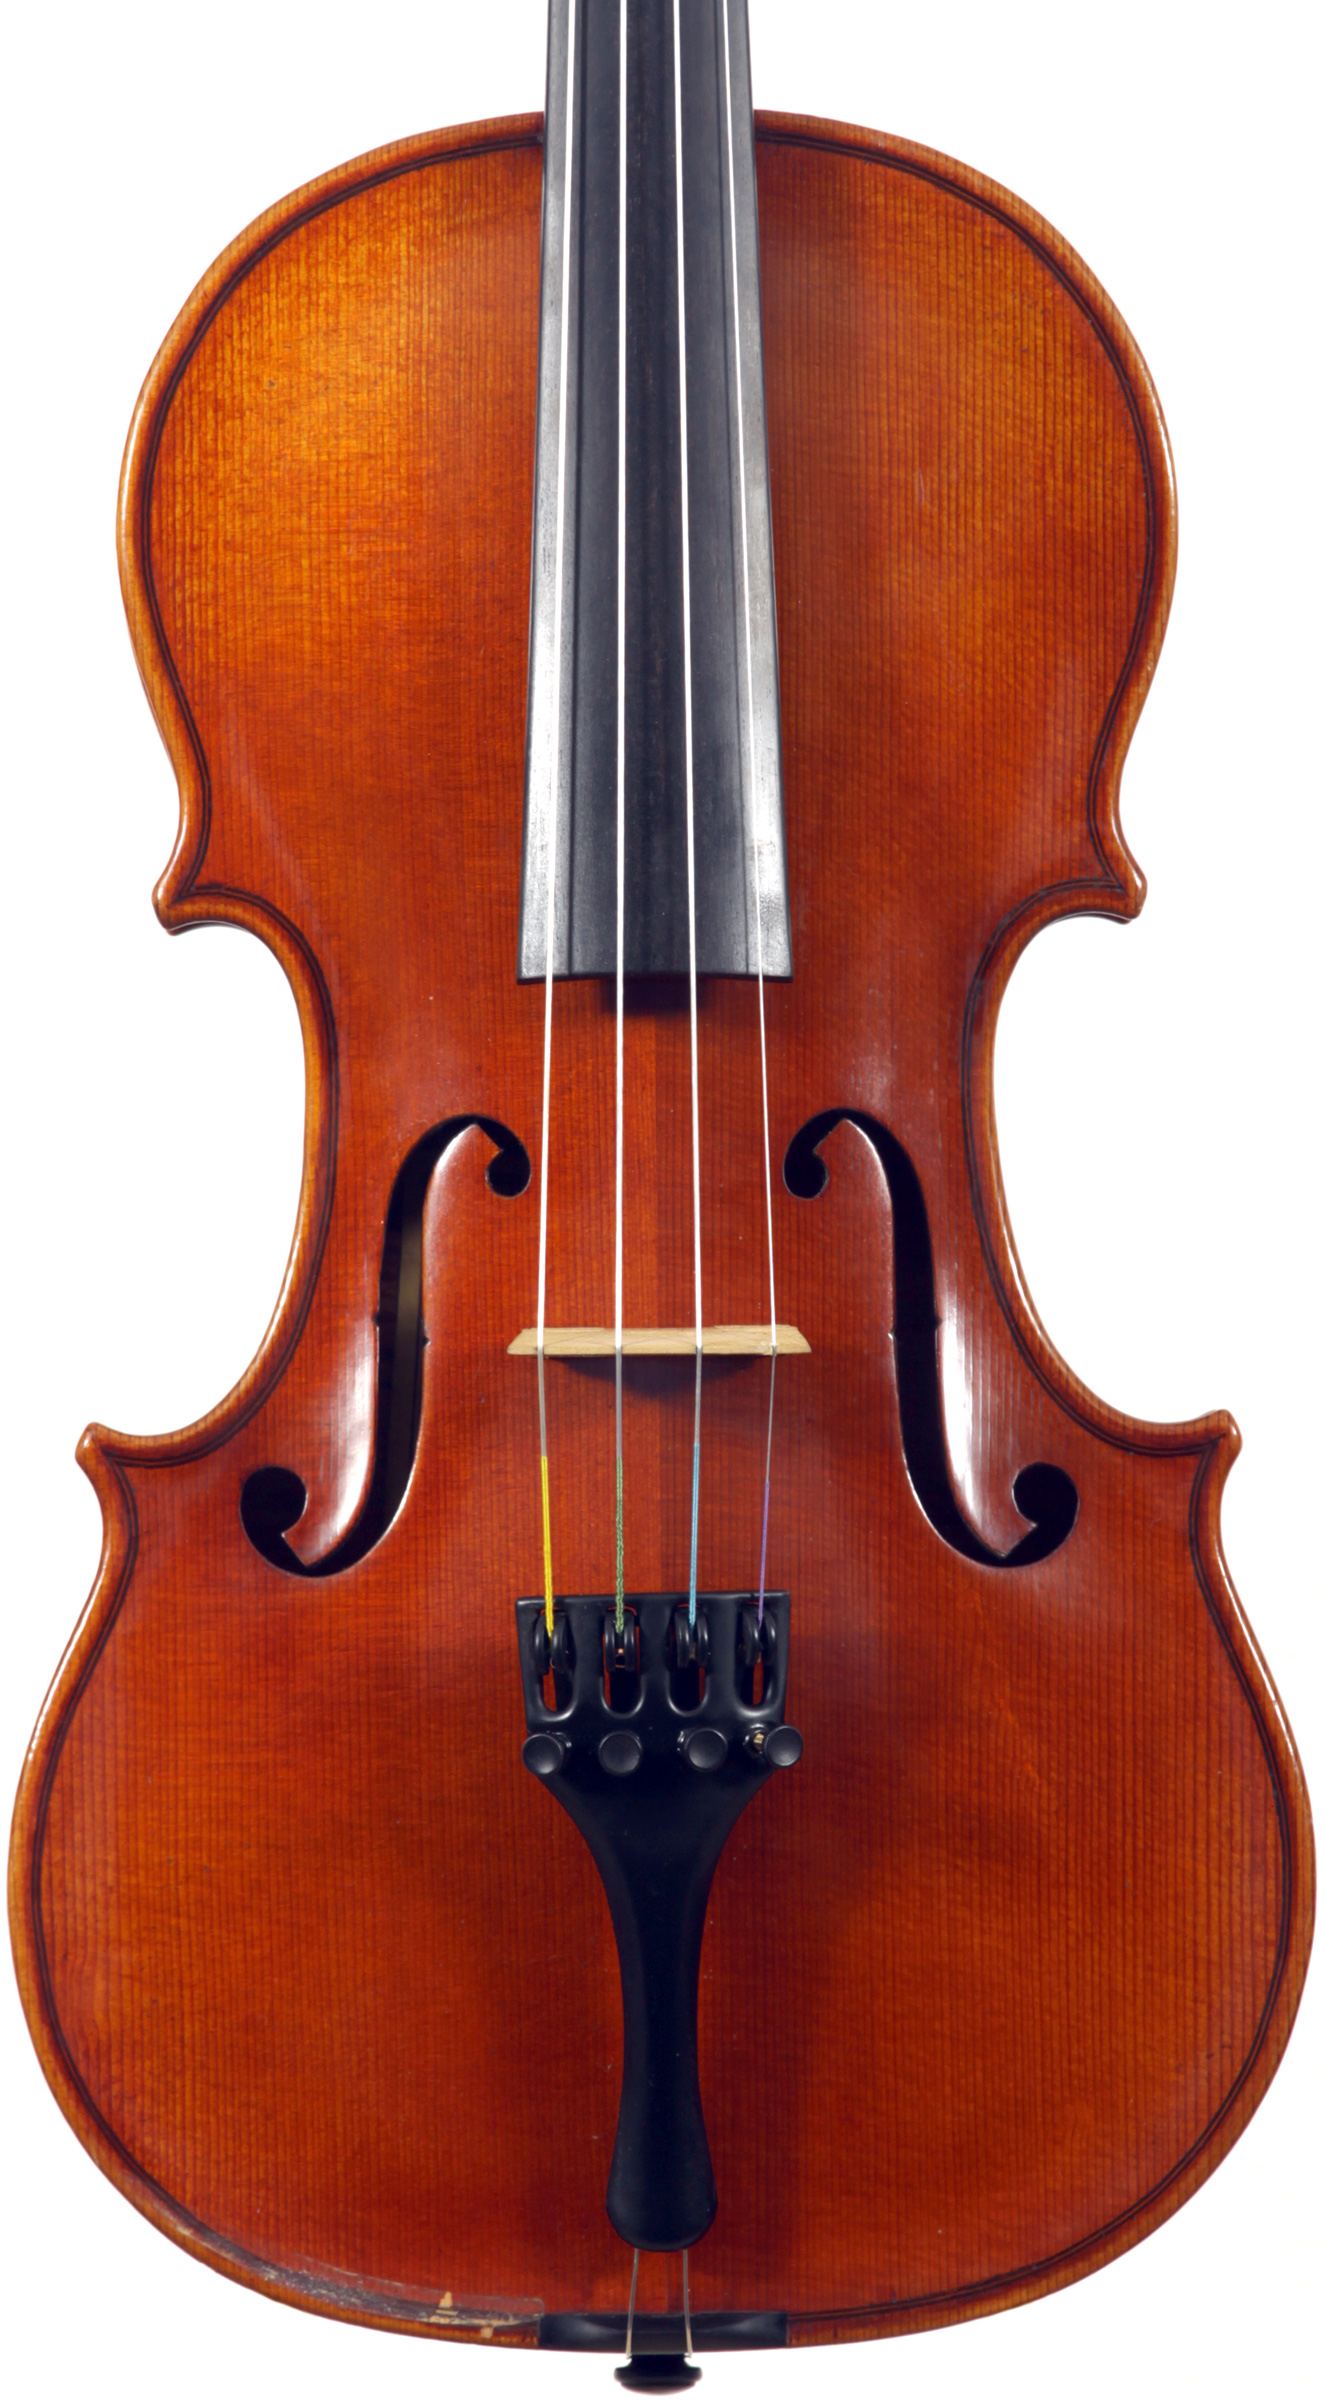 Violins on Sale - - The Violin of Southern Africa